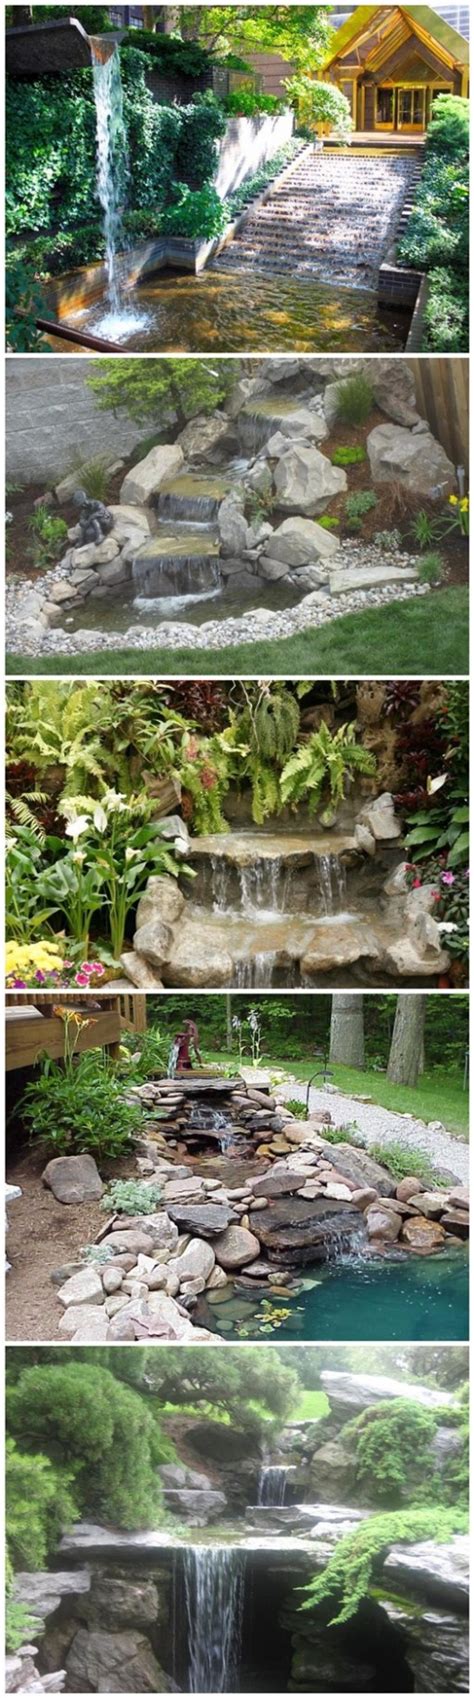 How To Build A Garden Waterfall Pond Diy Tag